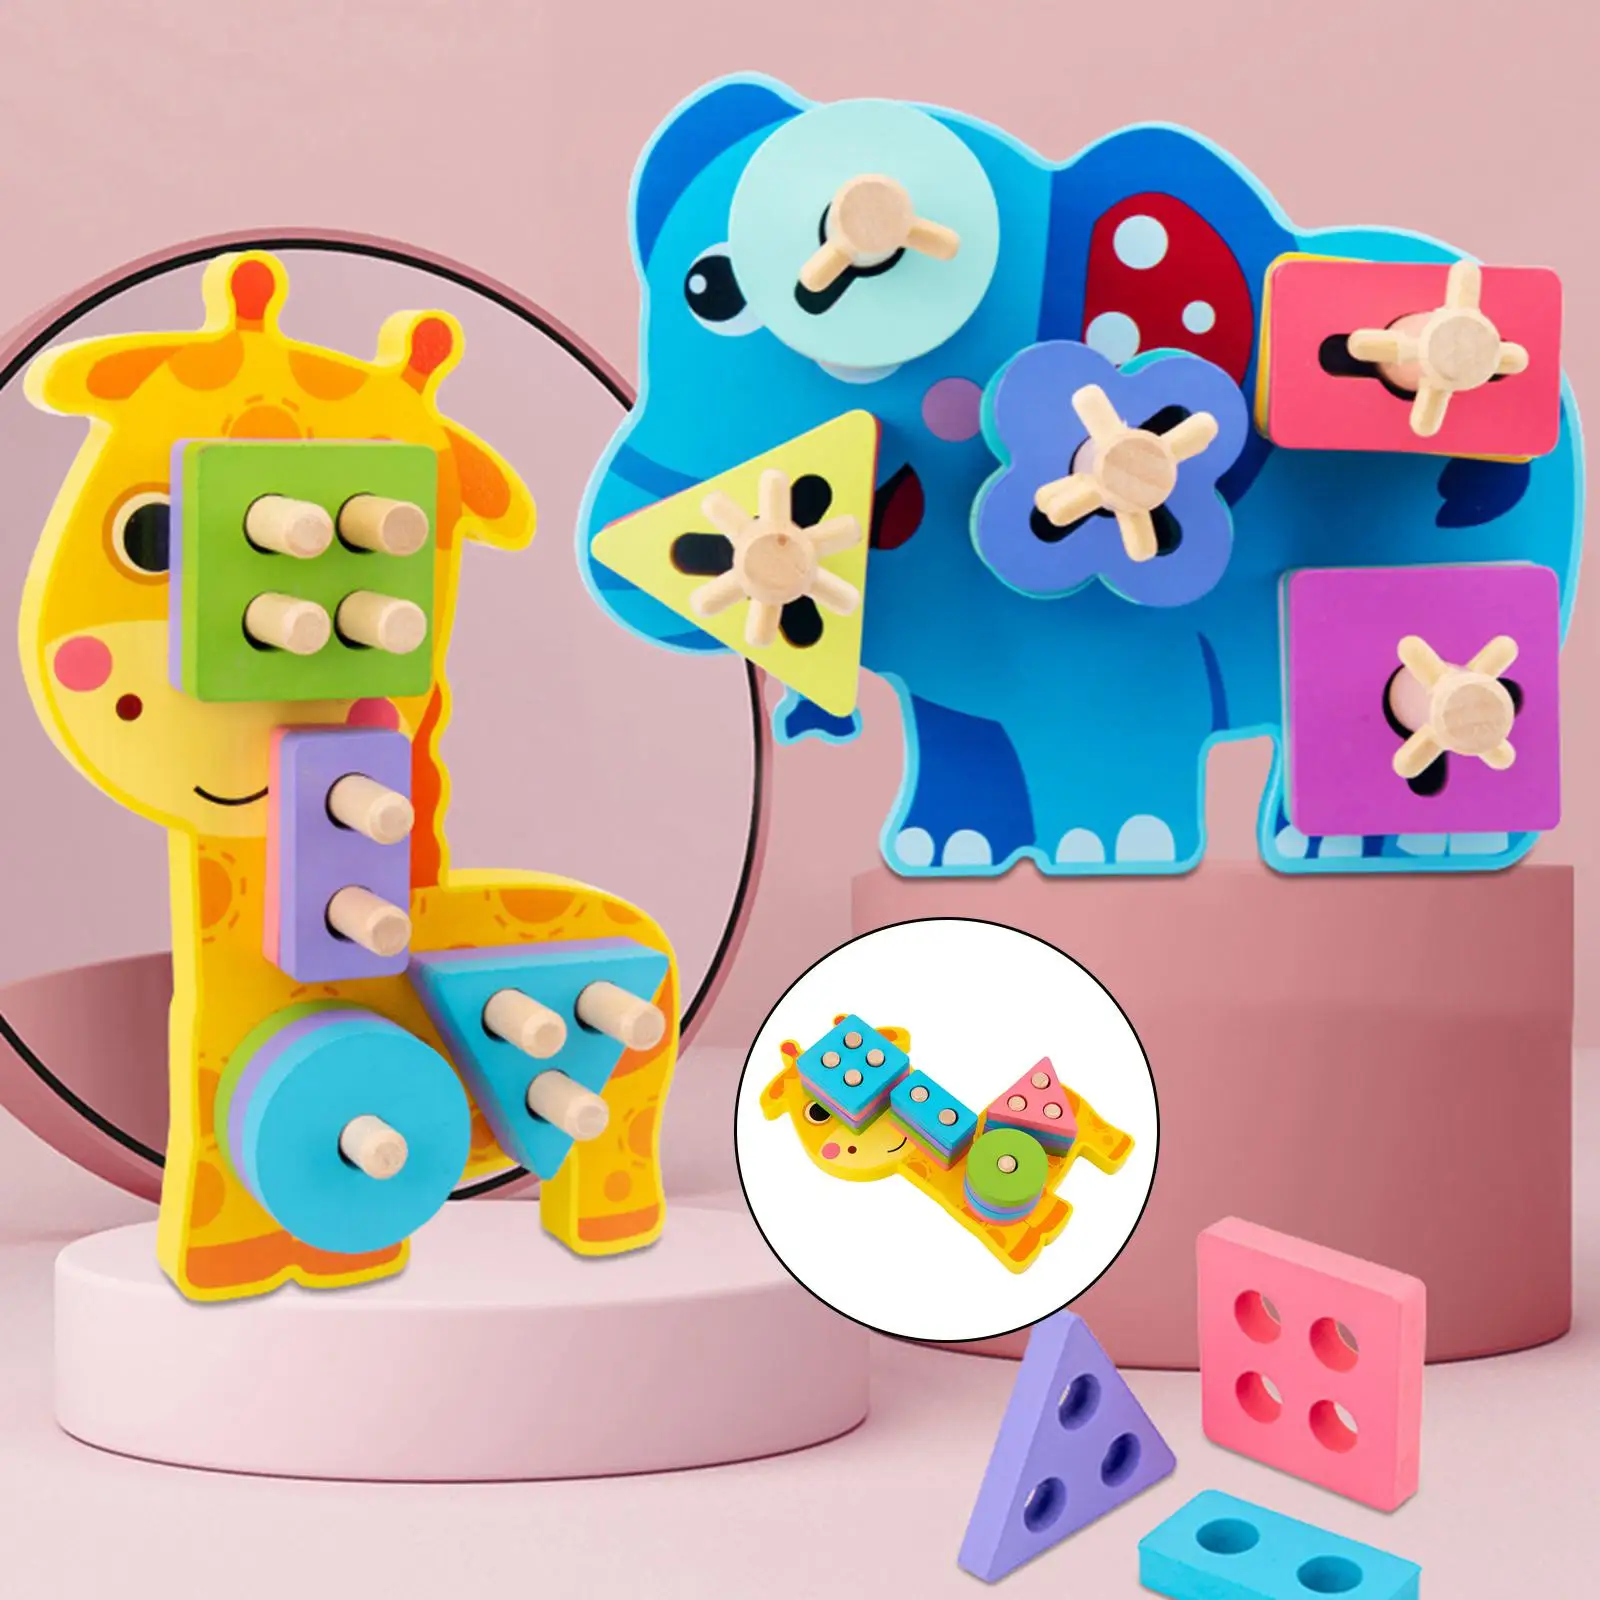 Baby Montessori Wooden Shape Matching Stacking Blocks Toys Color Cognitive Sensory Toys Developmental for Children 1-2 Years Old